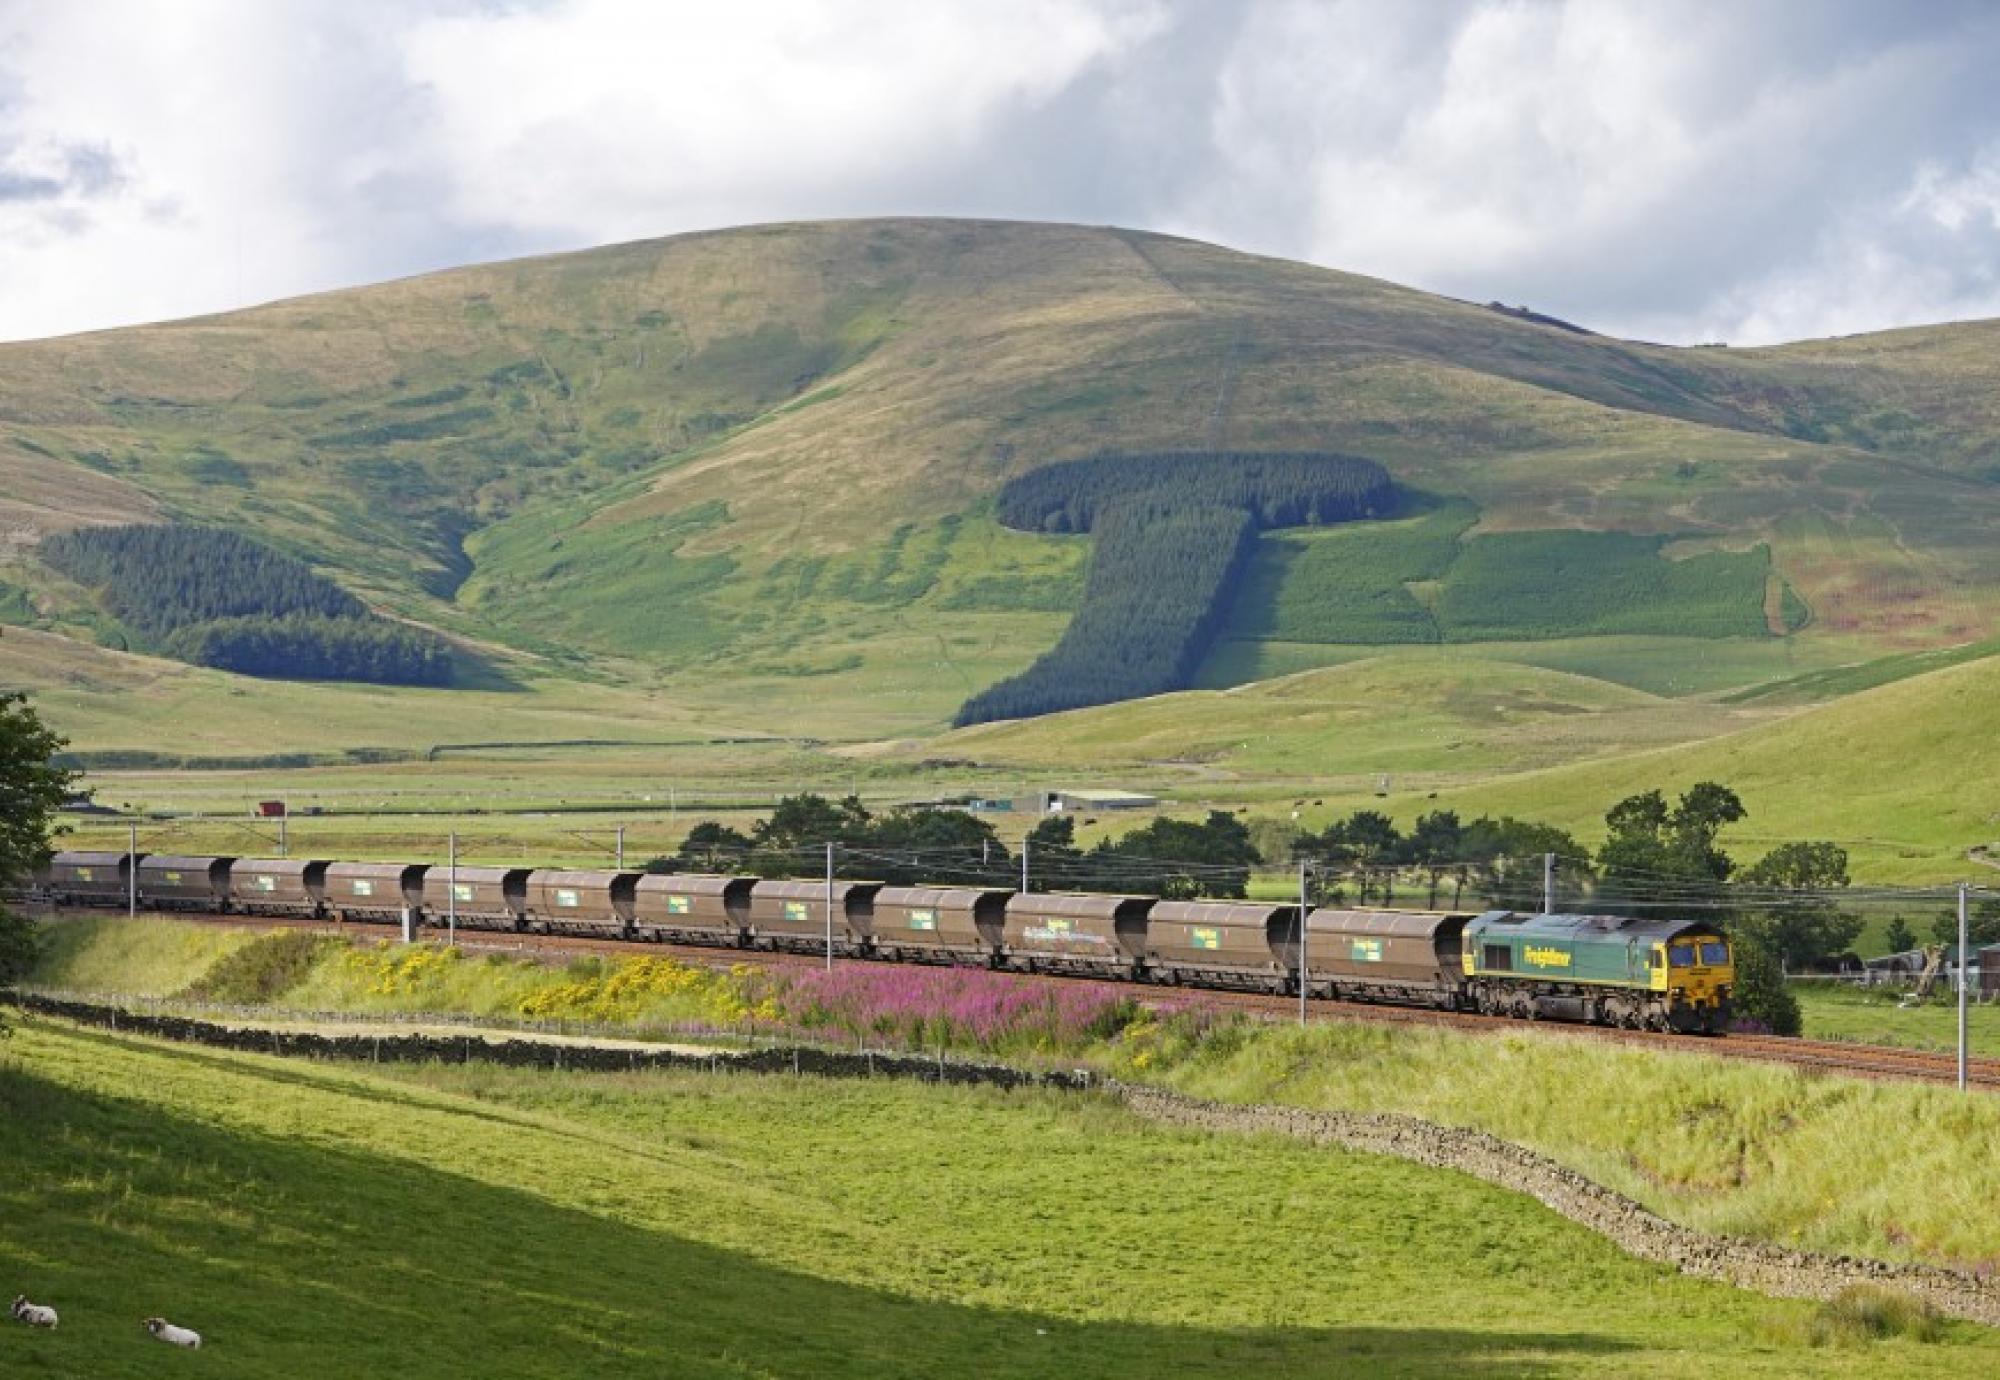 reightliner Heavy Haul coal train as it passes through scenic Scottish countryside.